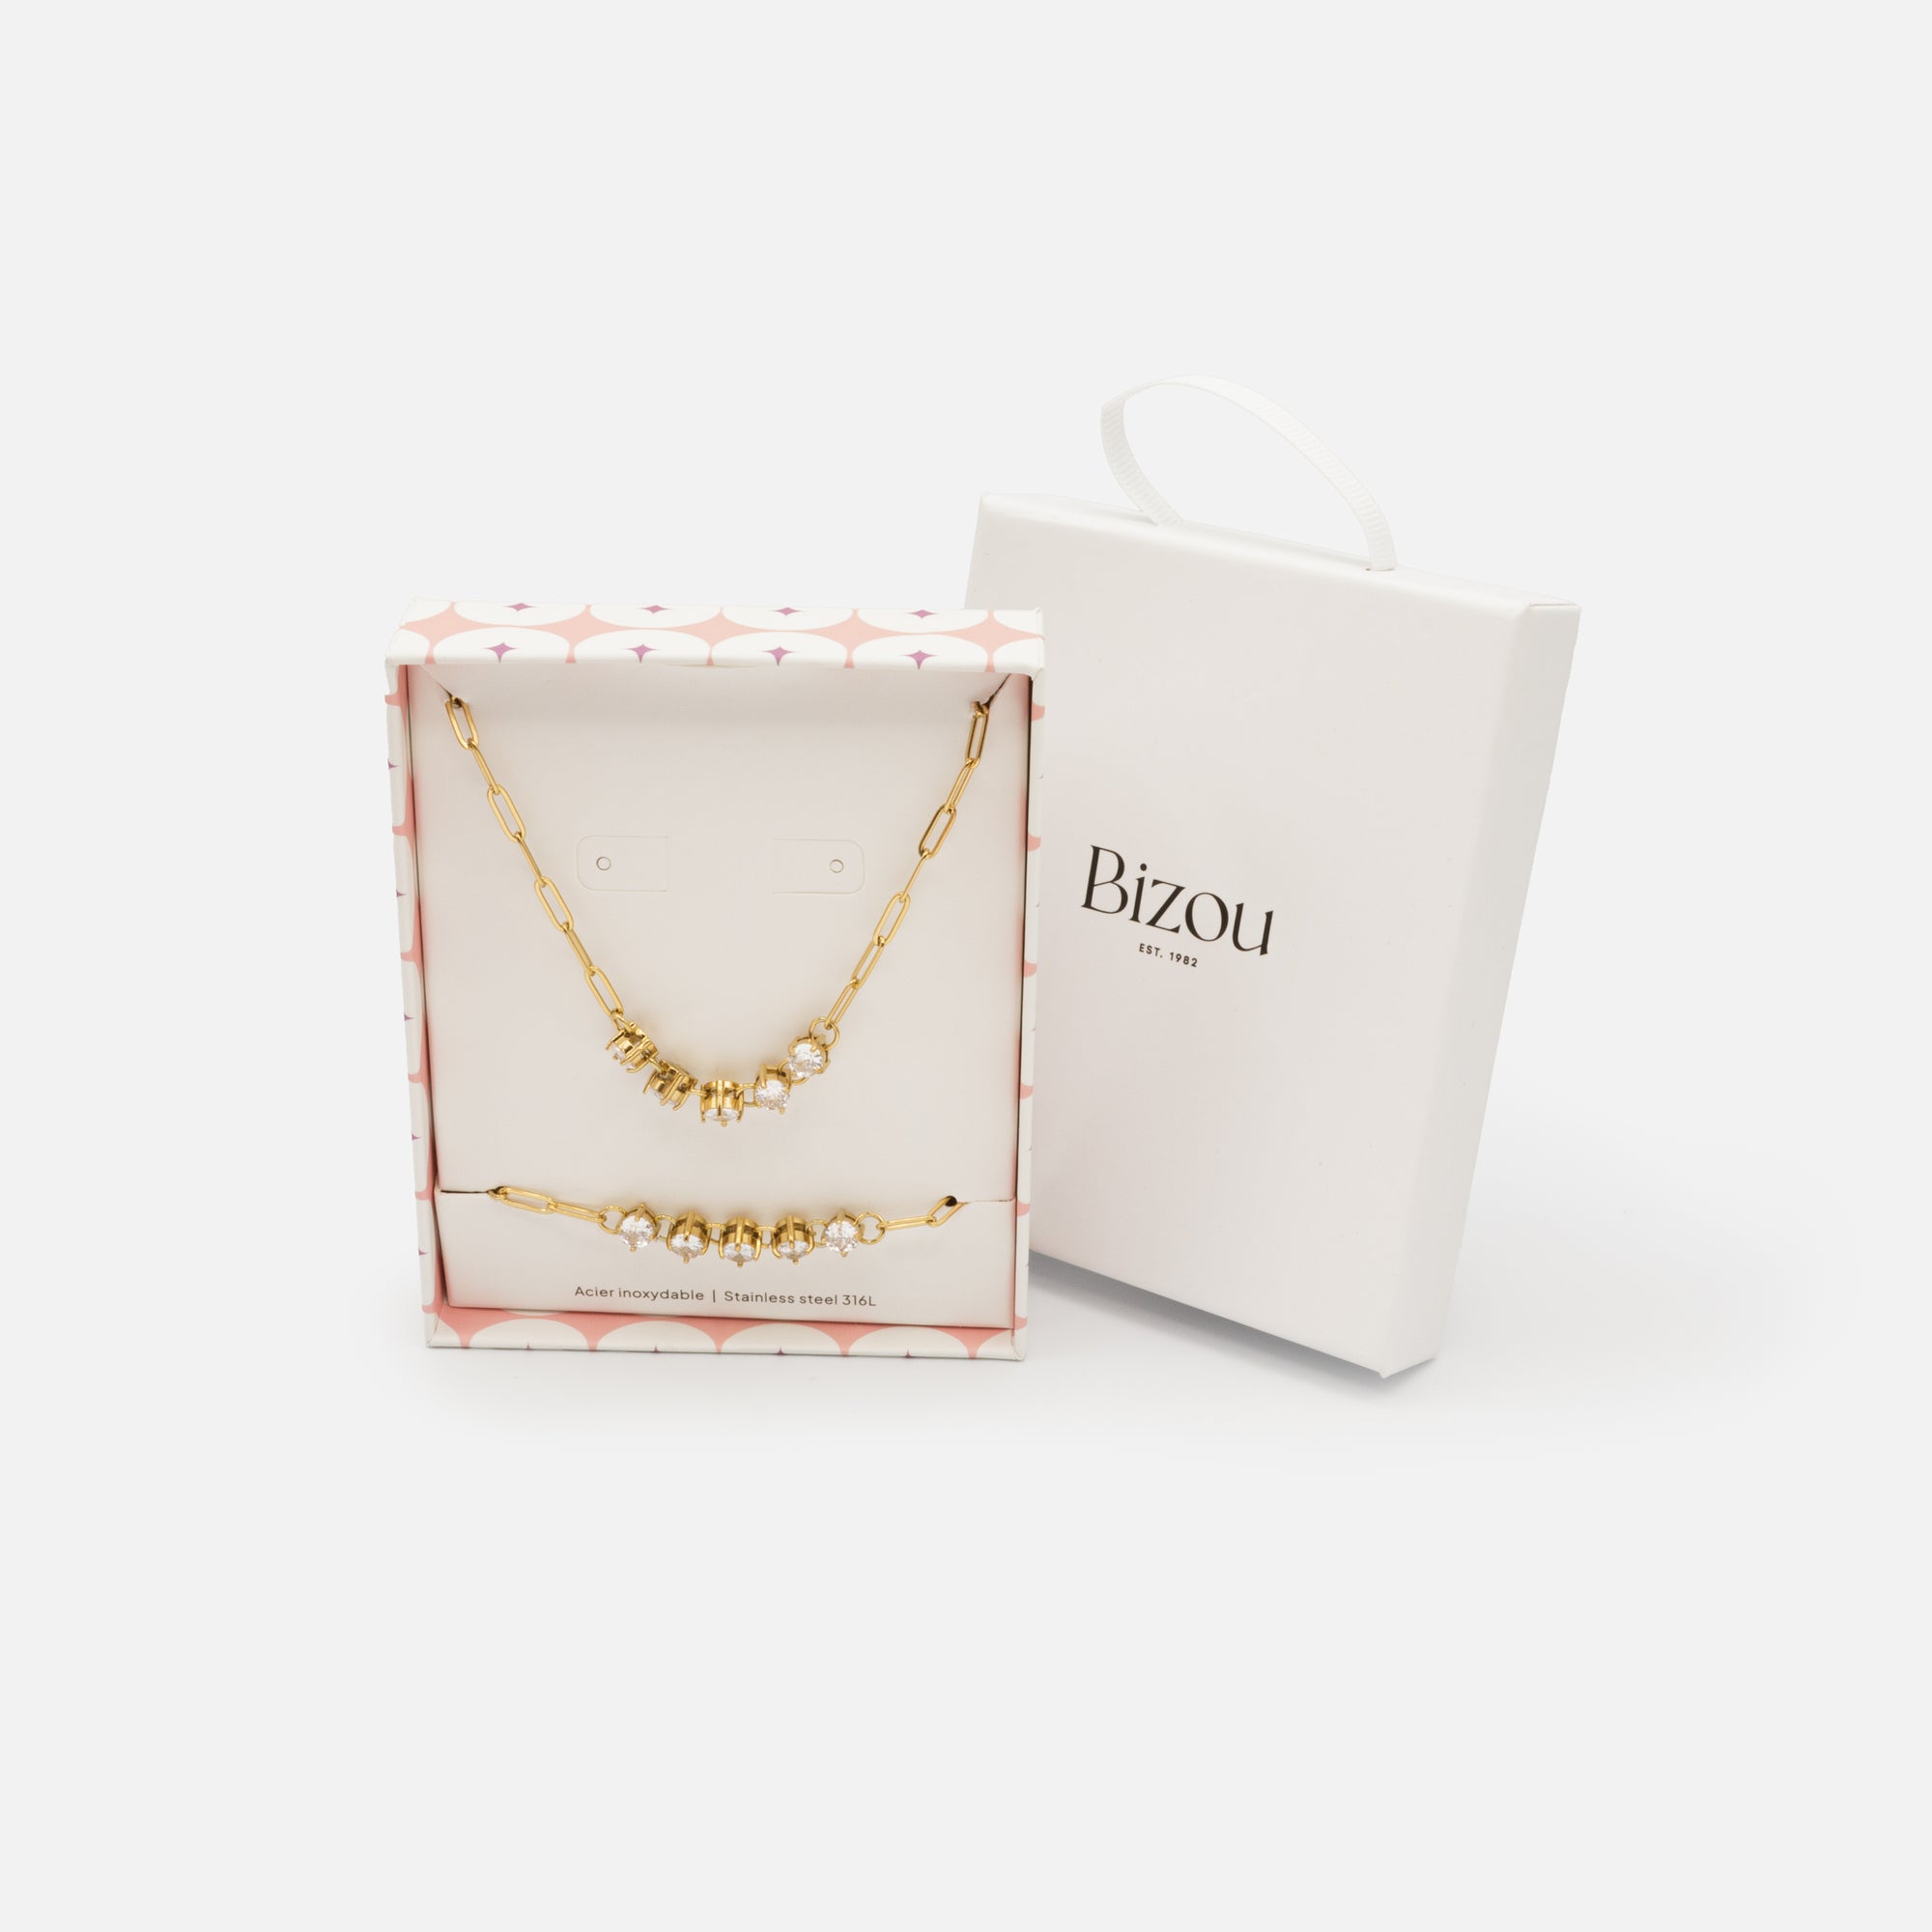 Gold paper clip chain necklace and bracelet set with stainless steel cubic zirconia